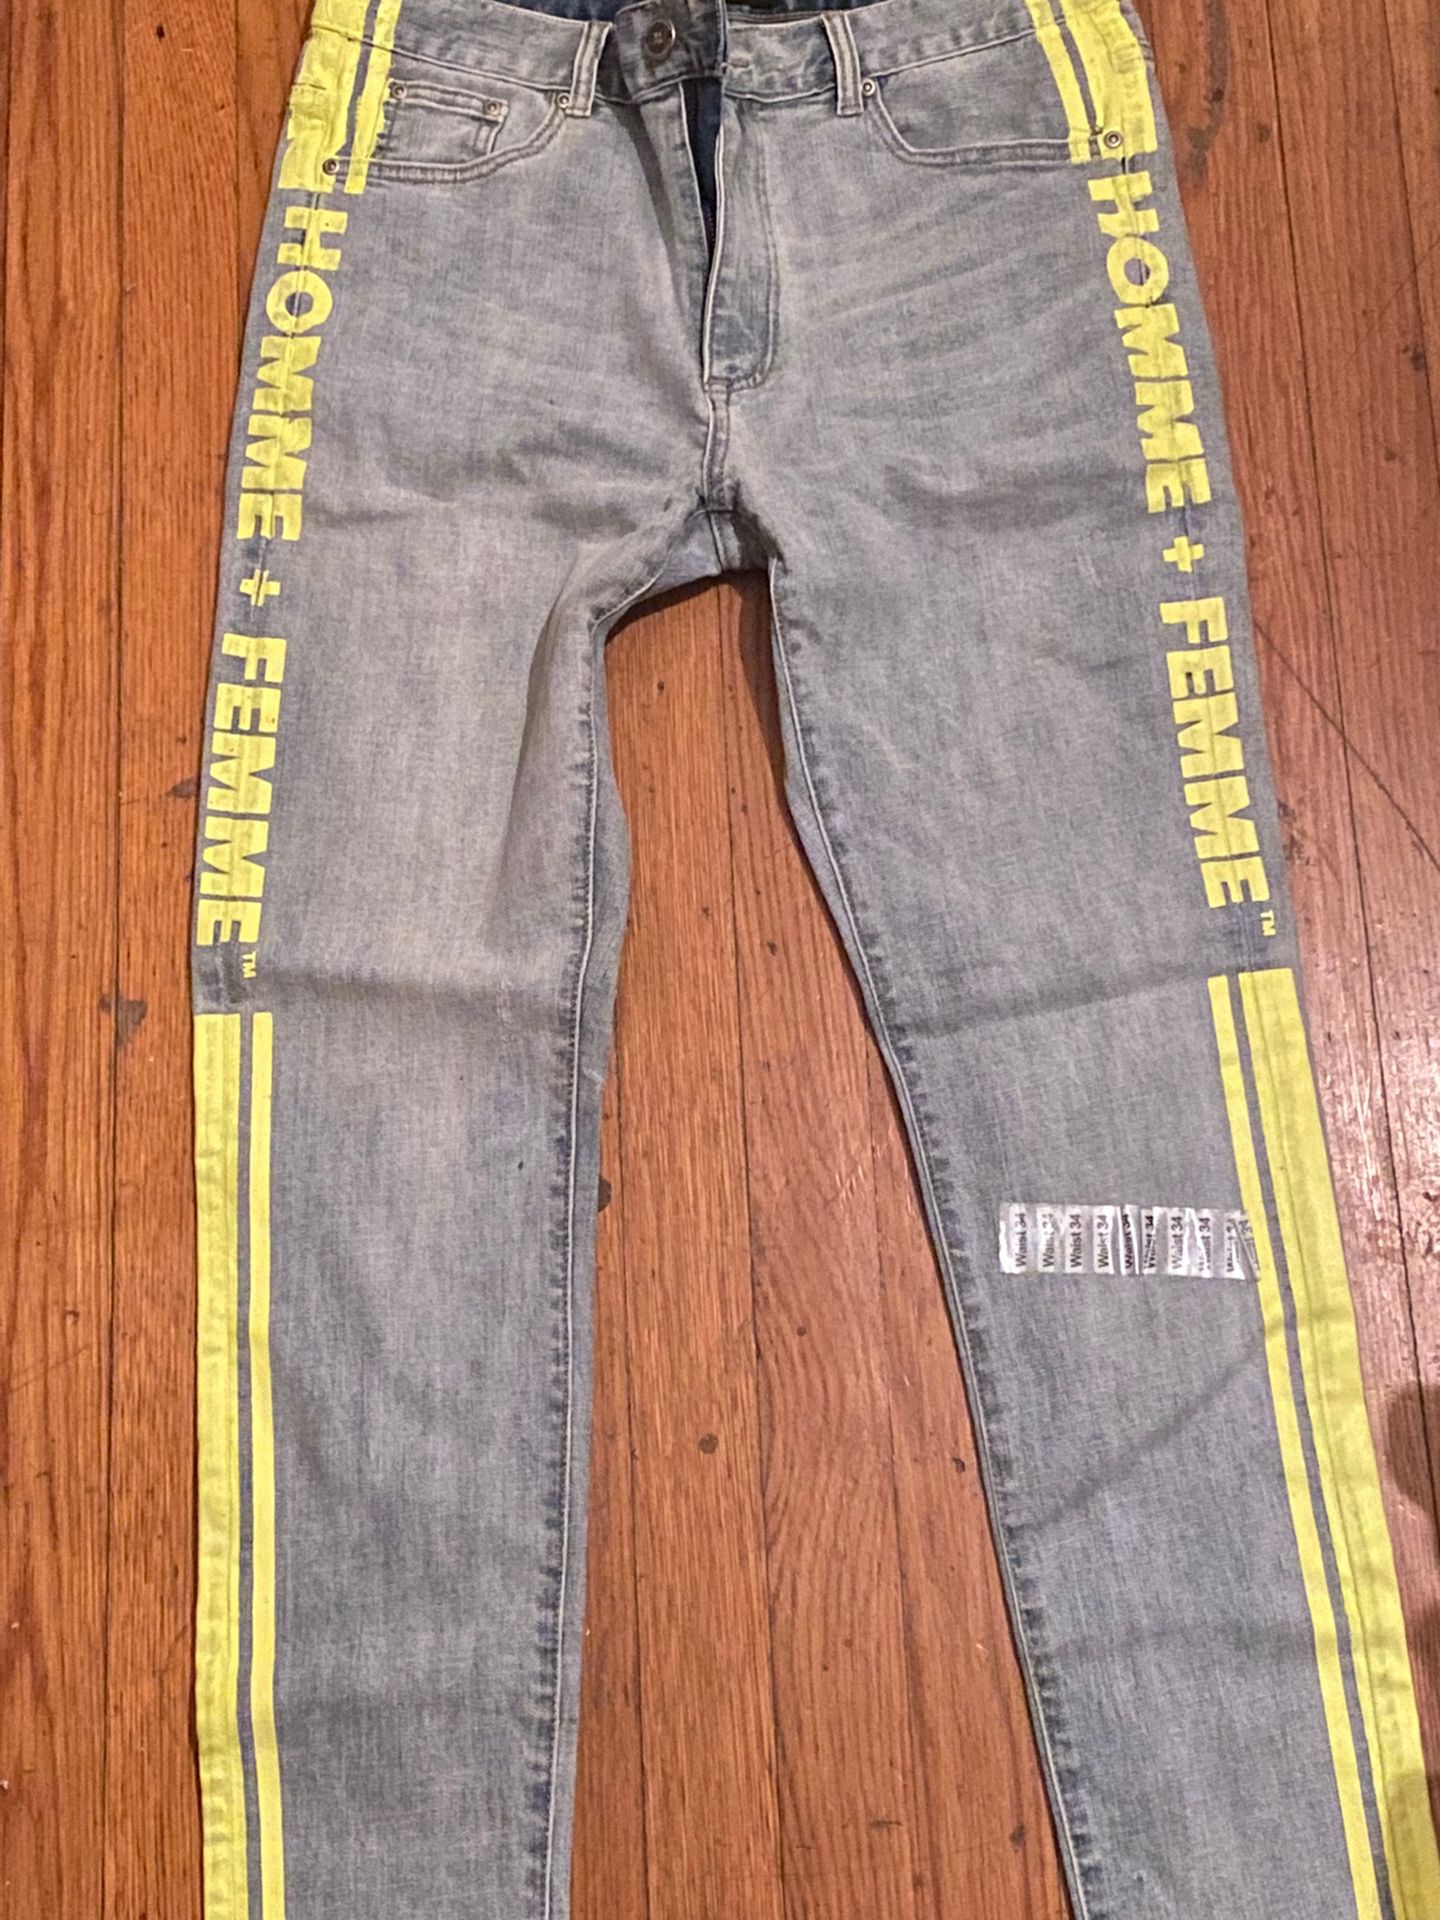 Mens Homme + Femme Jeans for Sale in Quincy, MA -